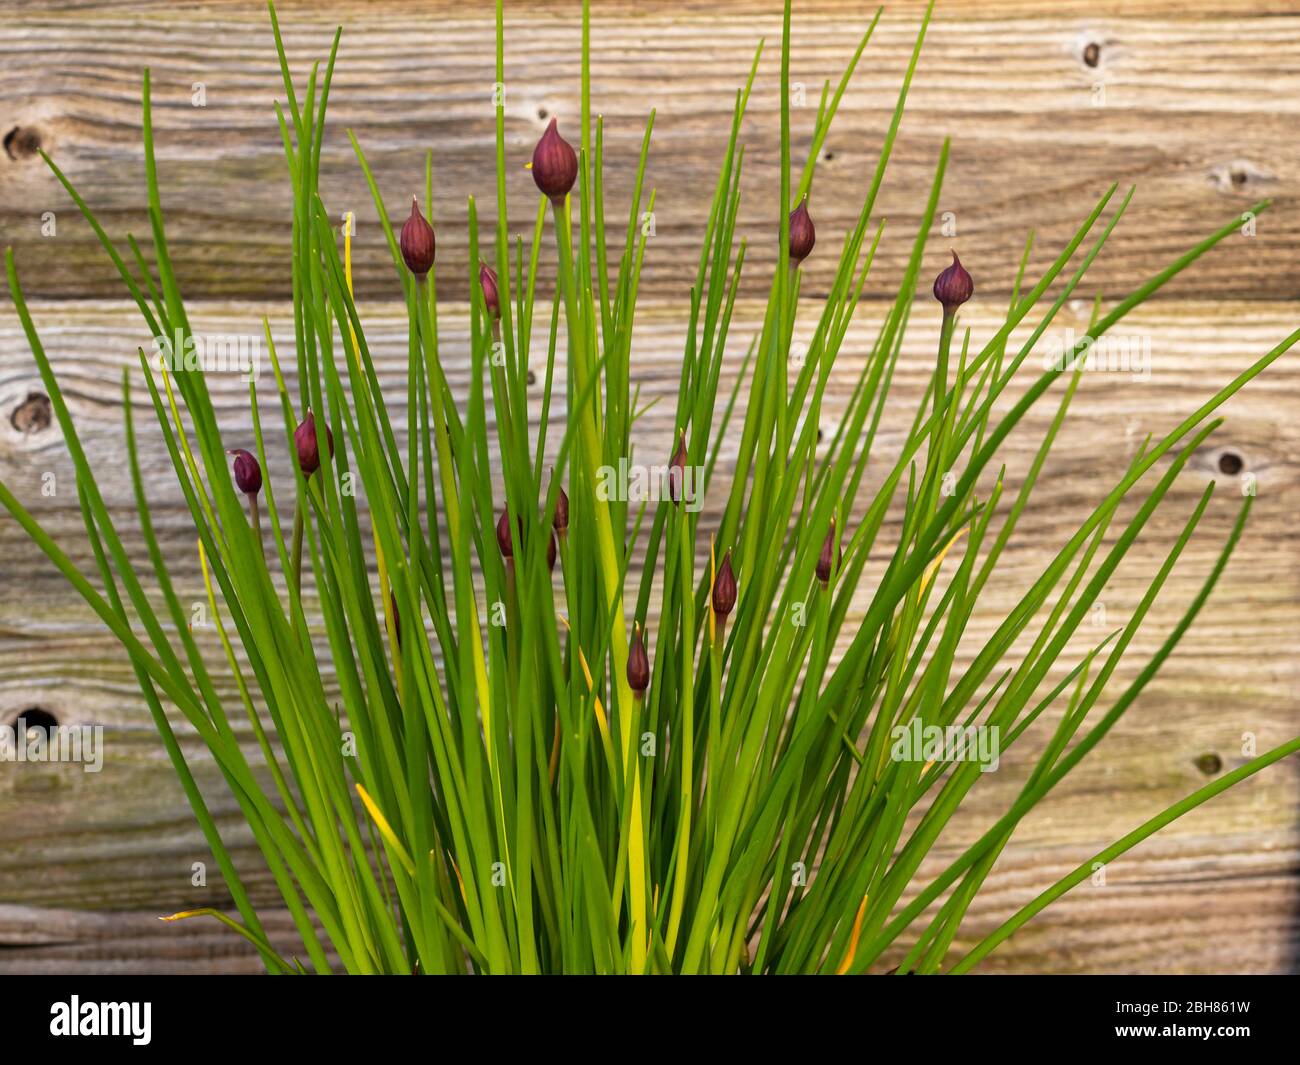 Allium chives plant with pretty flower buds and green leaves beside a wooden garden fence Stock Photo